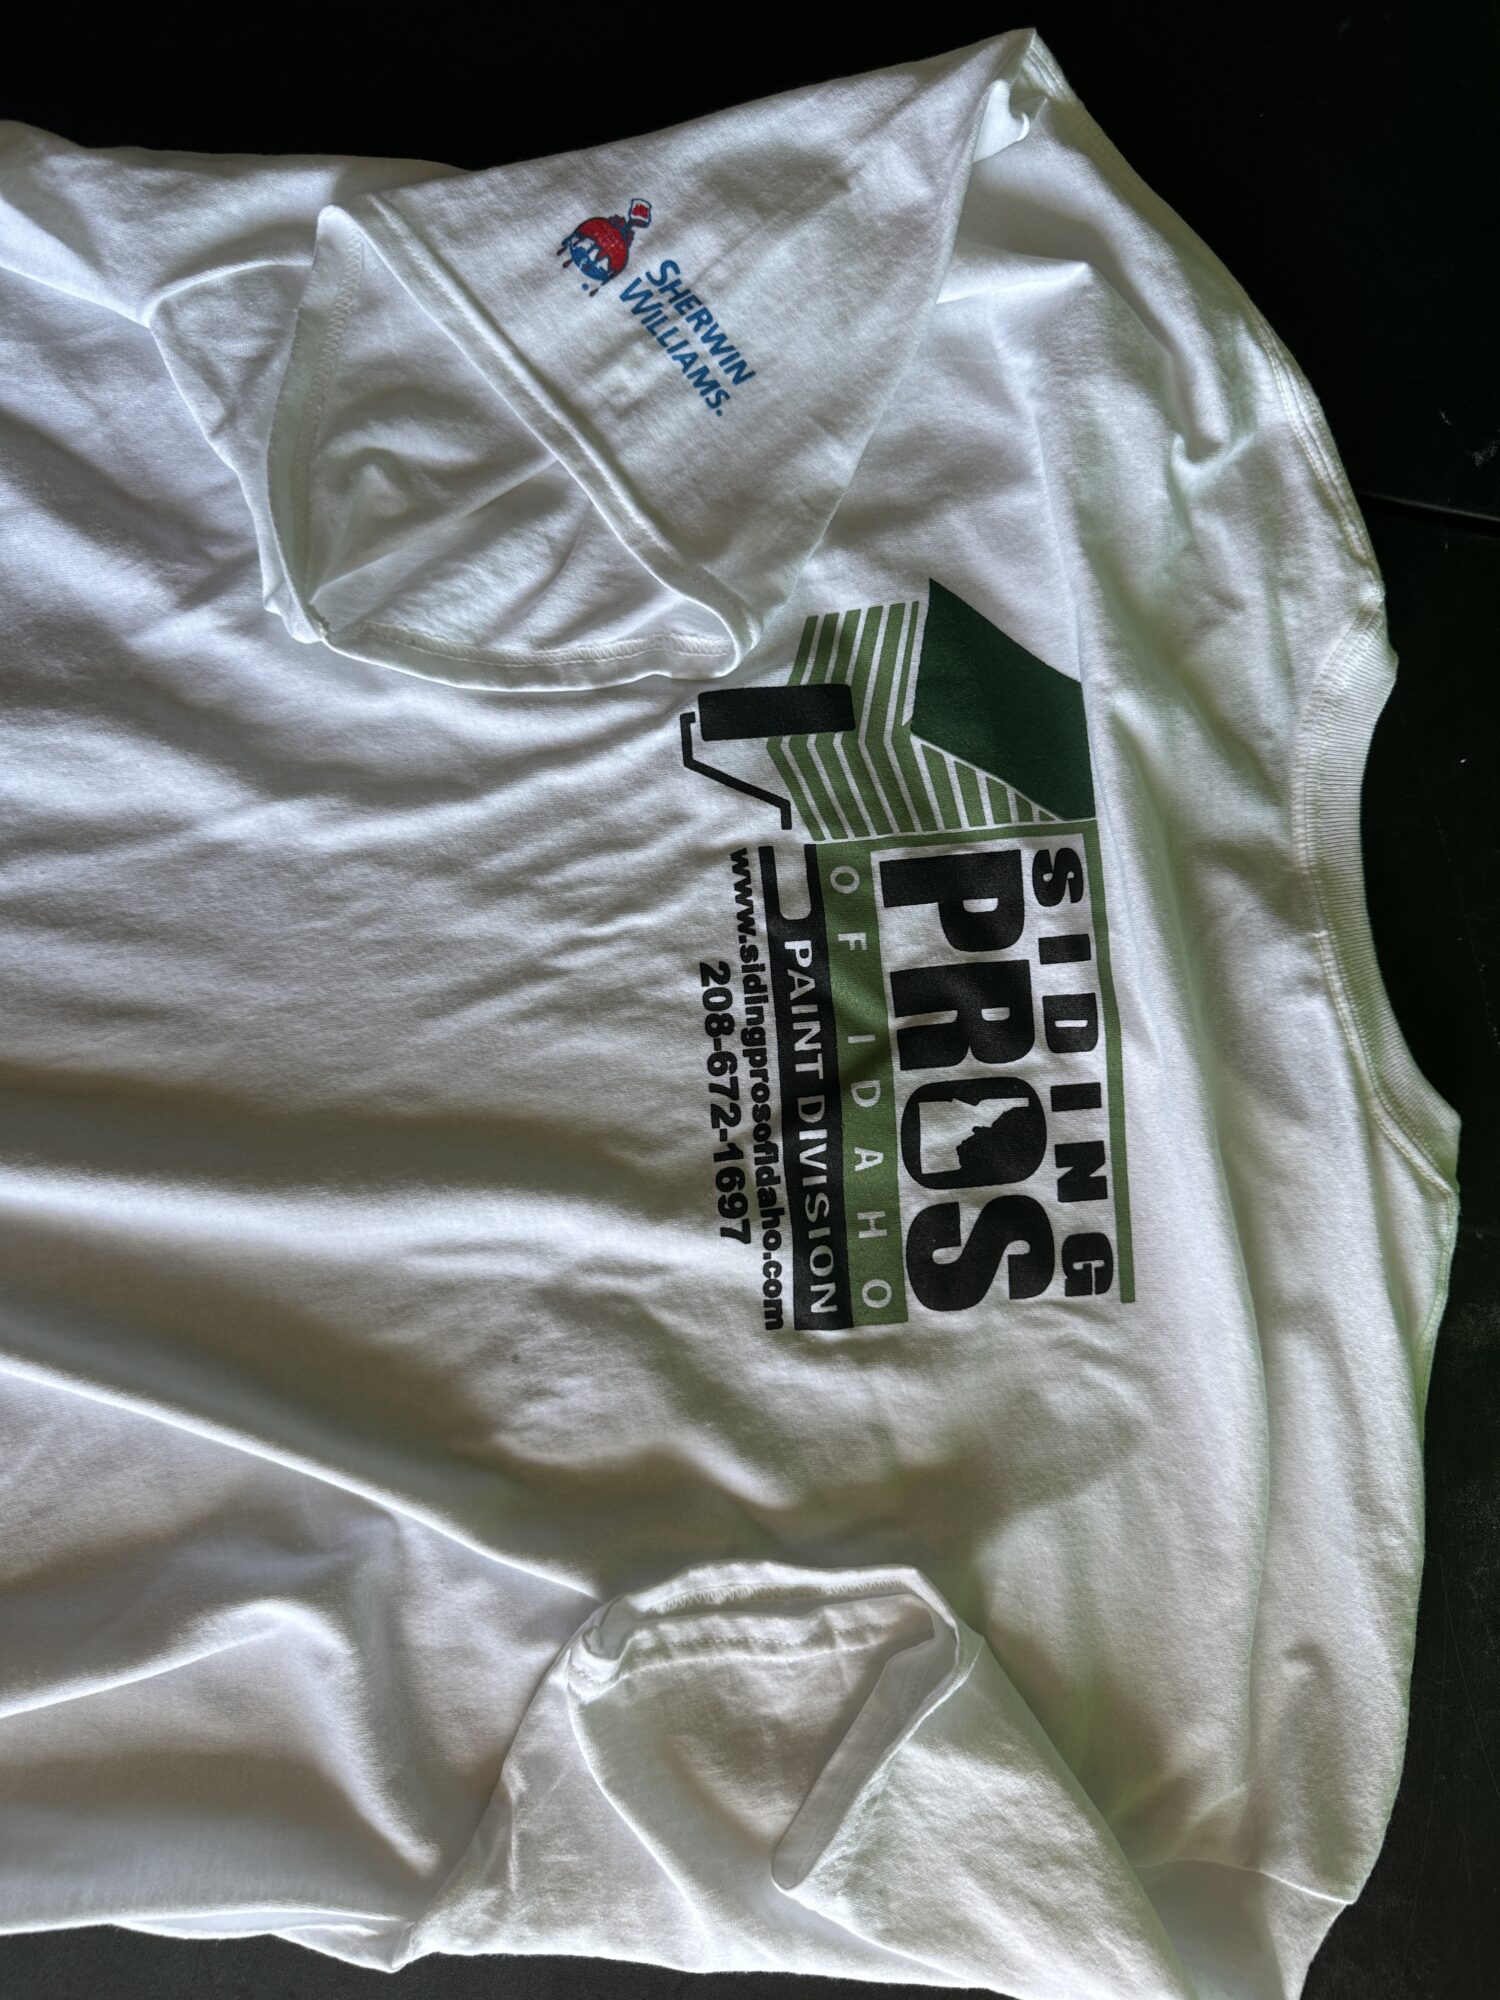 Custom 4 color screen printed t-shirt with sleeve placement for siding company in Nampa